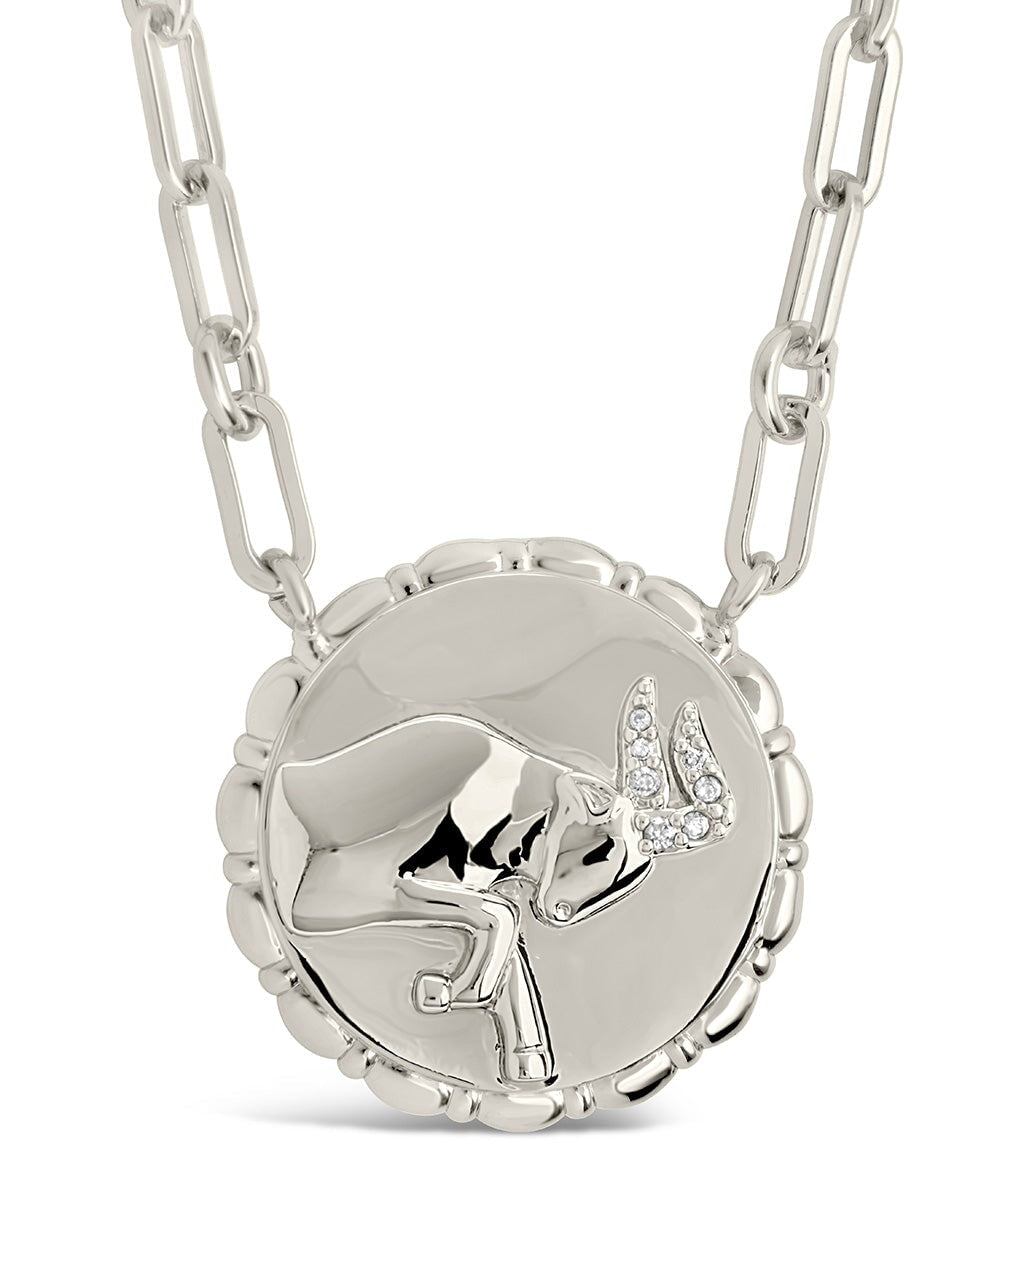 Bold Link Zodiac Necklace Necklace Sterling Forever Silver Taurus (Apr 20 - May 20) 